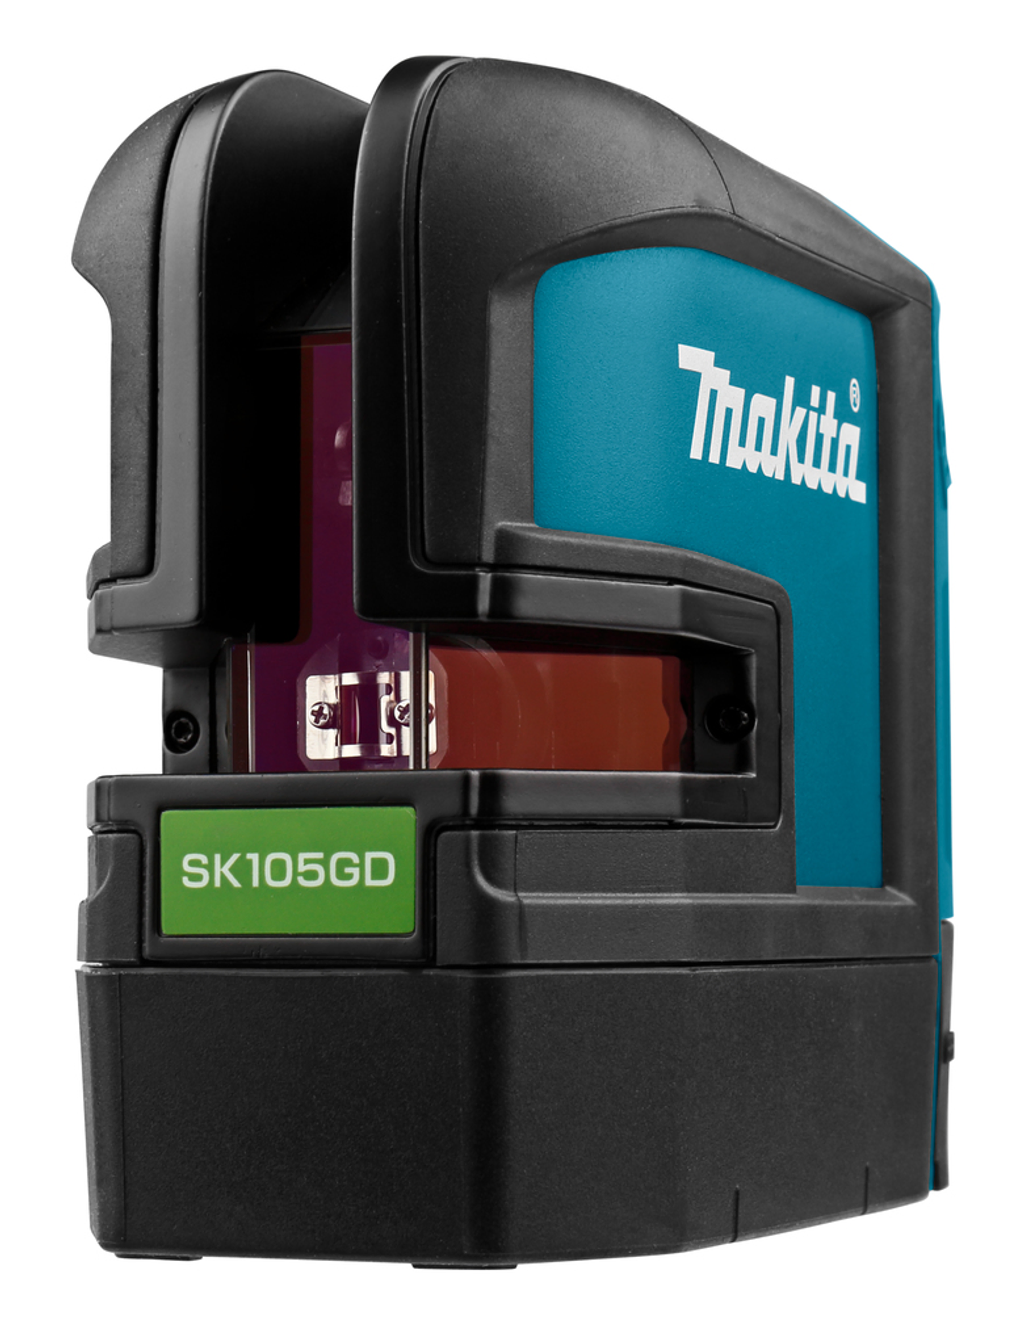 The Makita battery-powered cross-line laser is an automatic green laser level with an indoor visibility of up to 35m